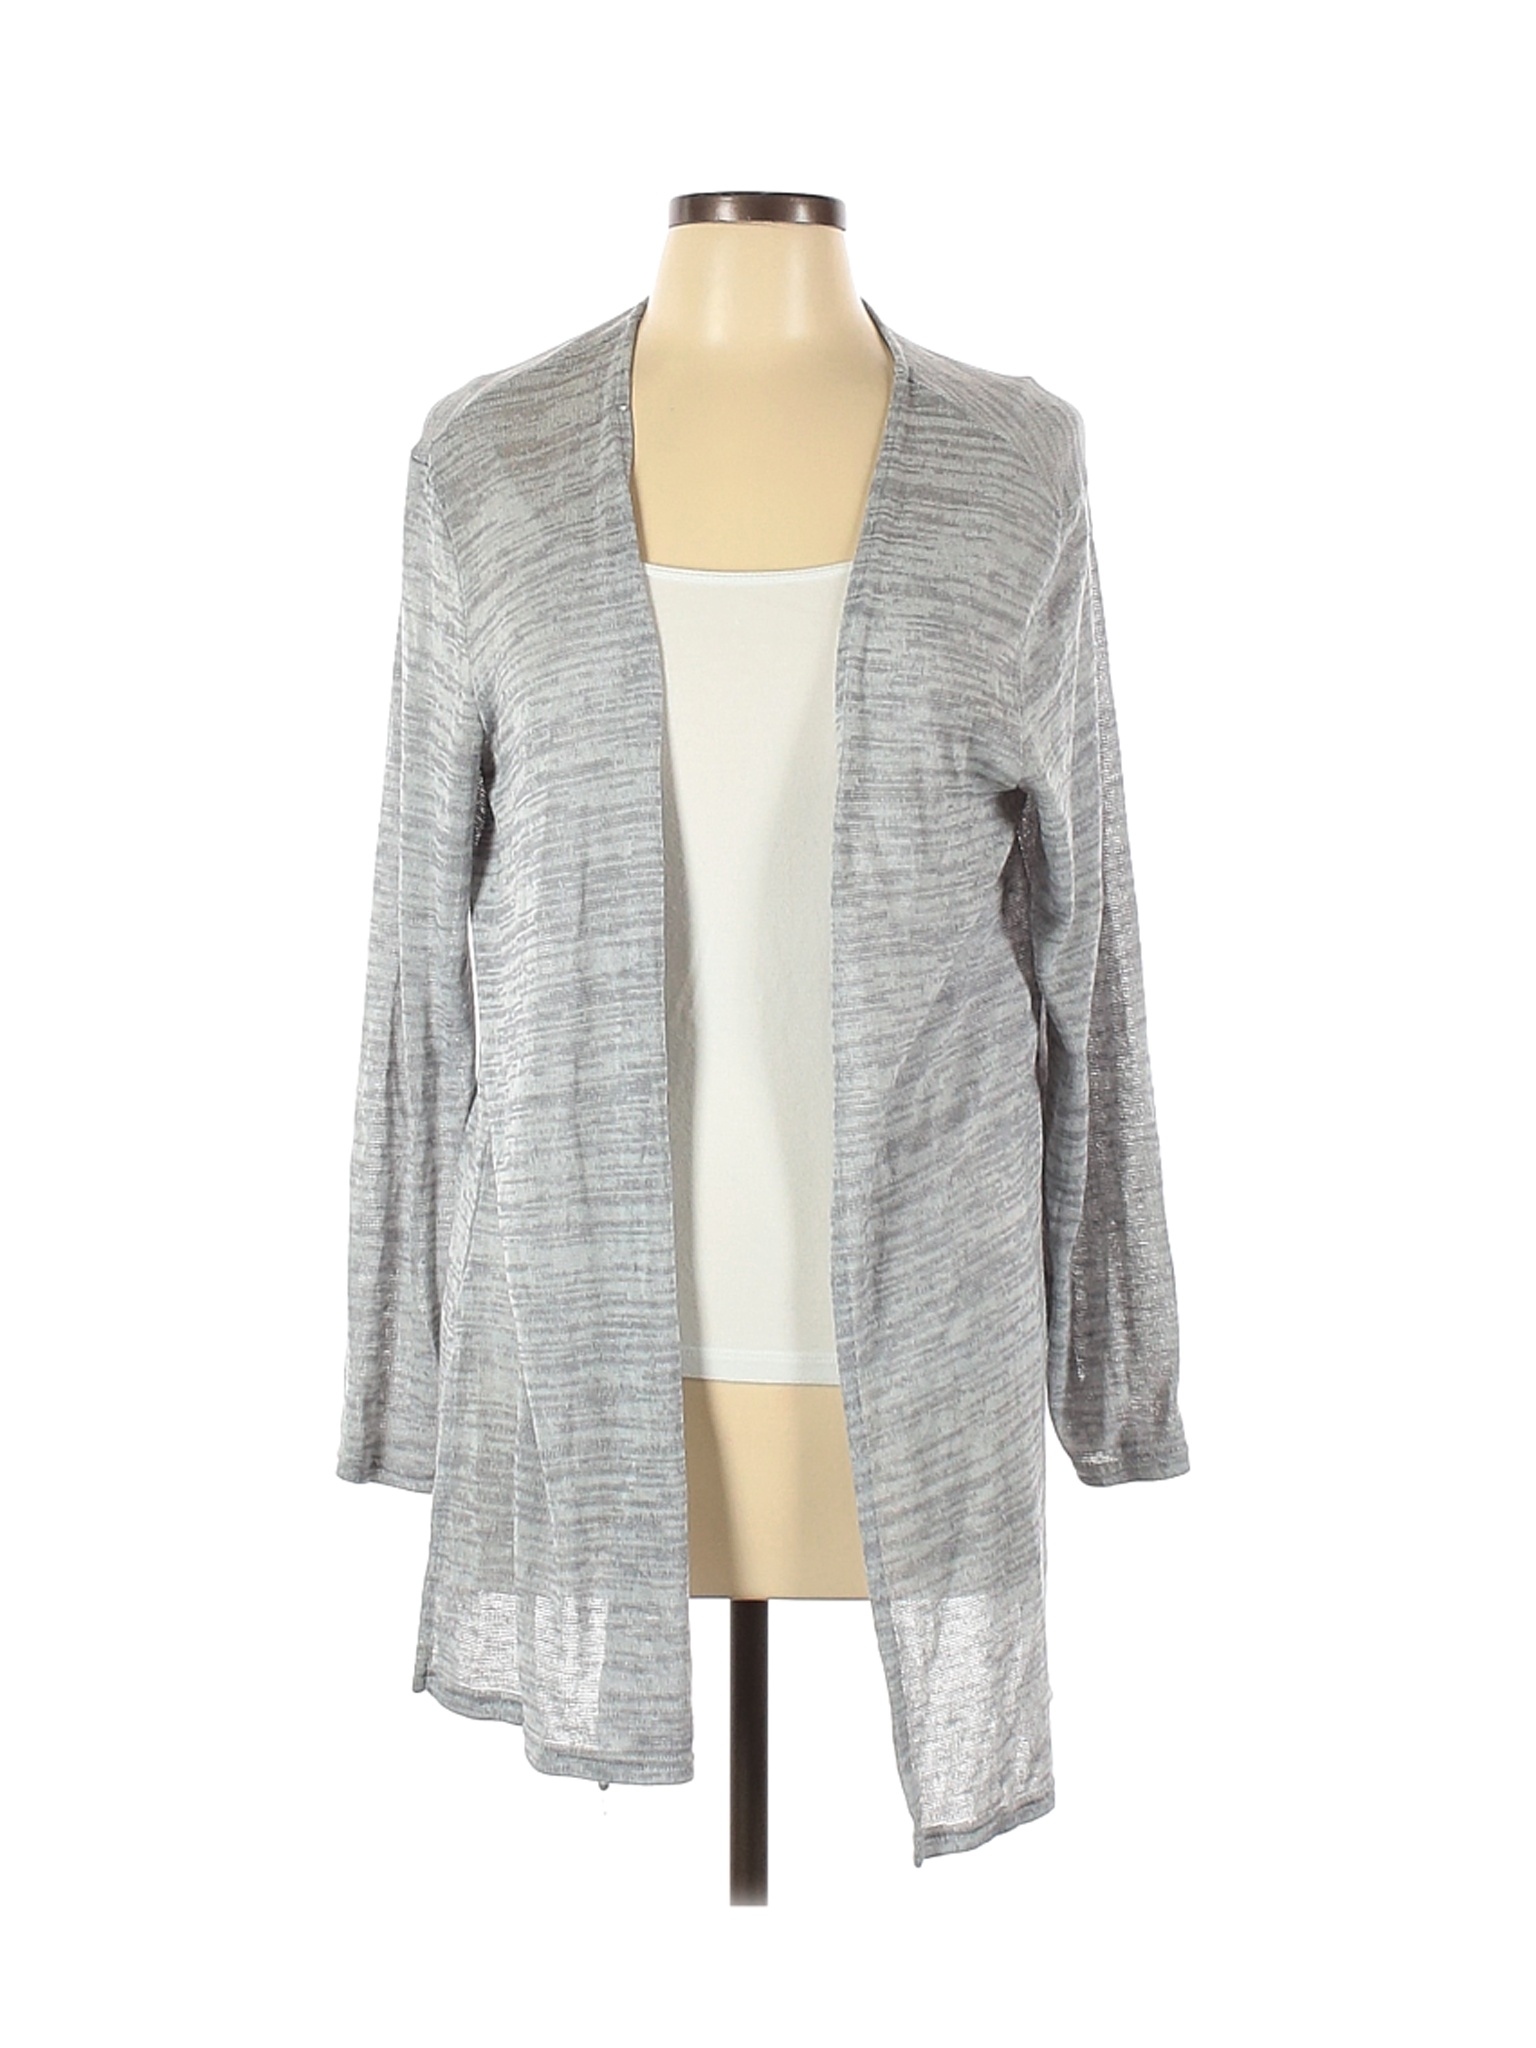 Divided by H&M Women Gray Cardigan L | eBay